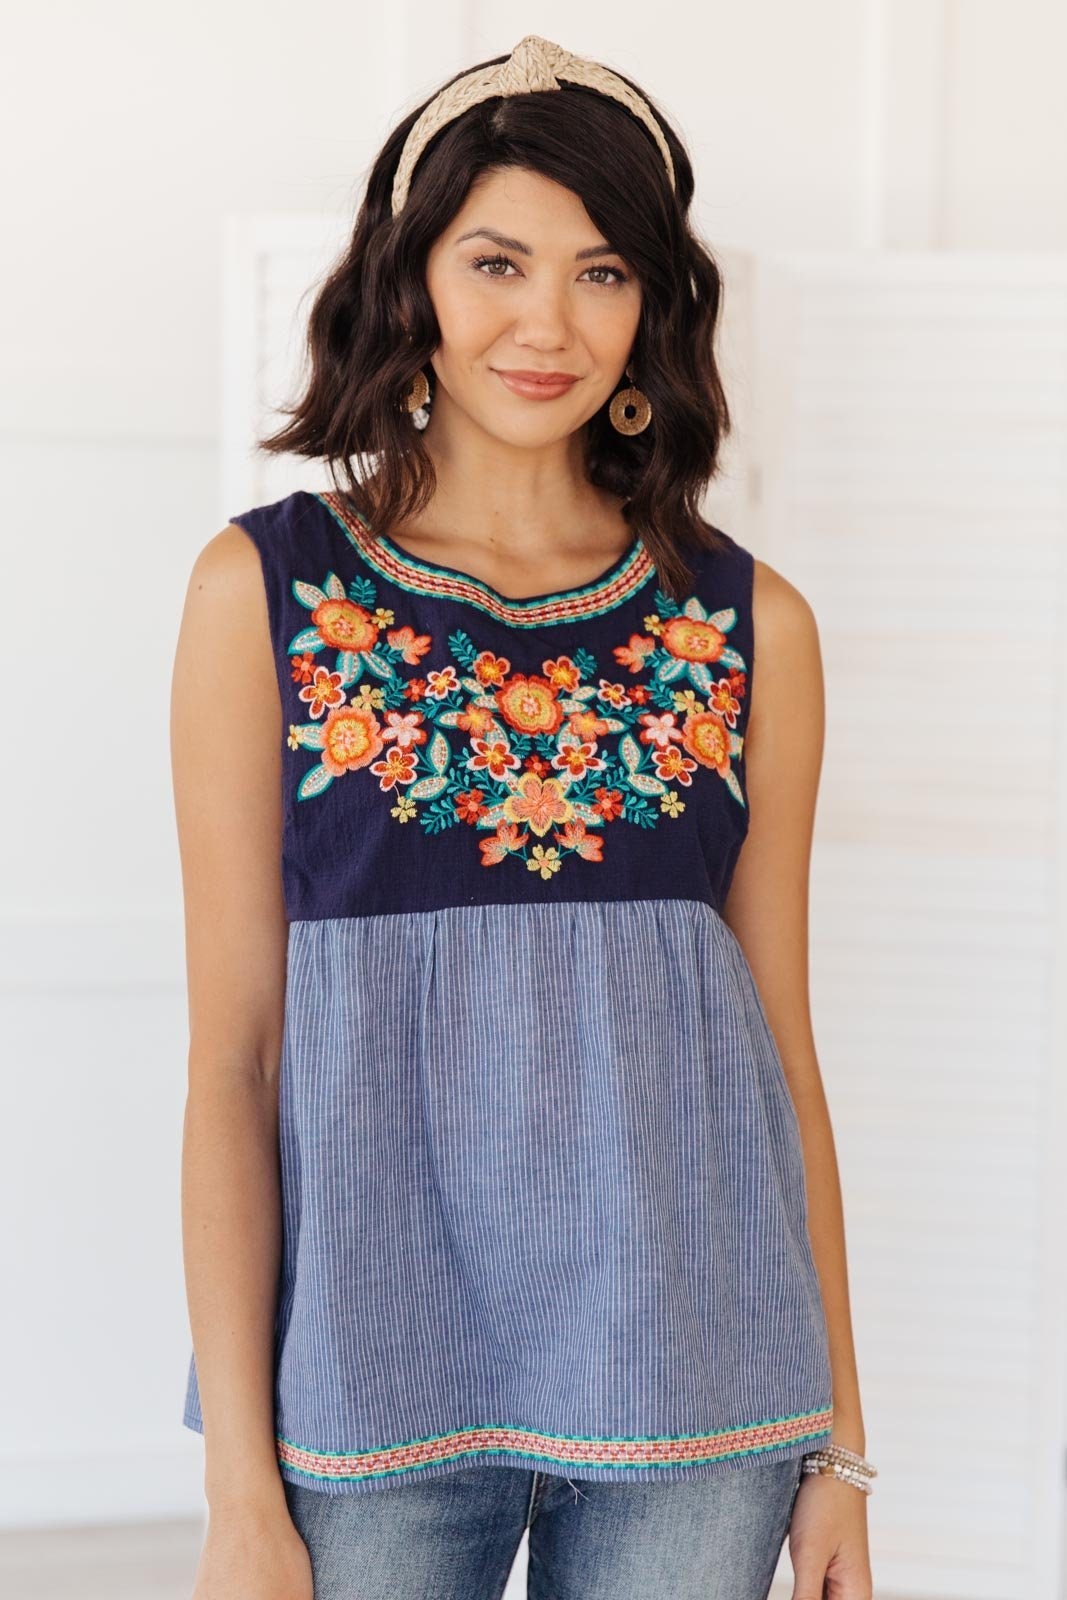 Harmony Top in Blue Womens Embroidered Floral Bohemian Boho - Etsy